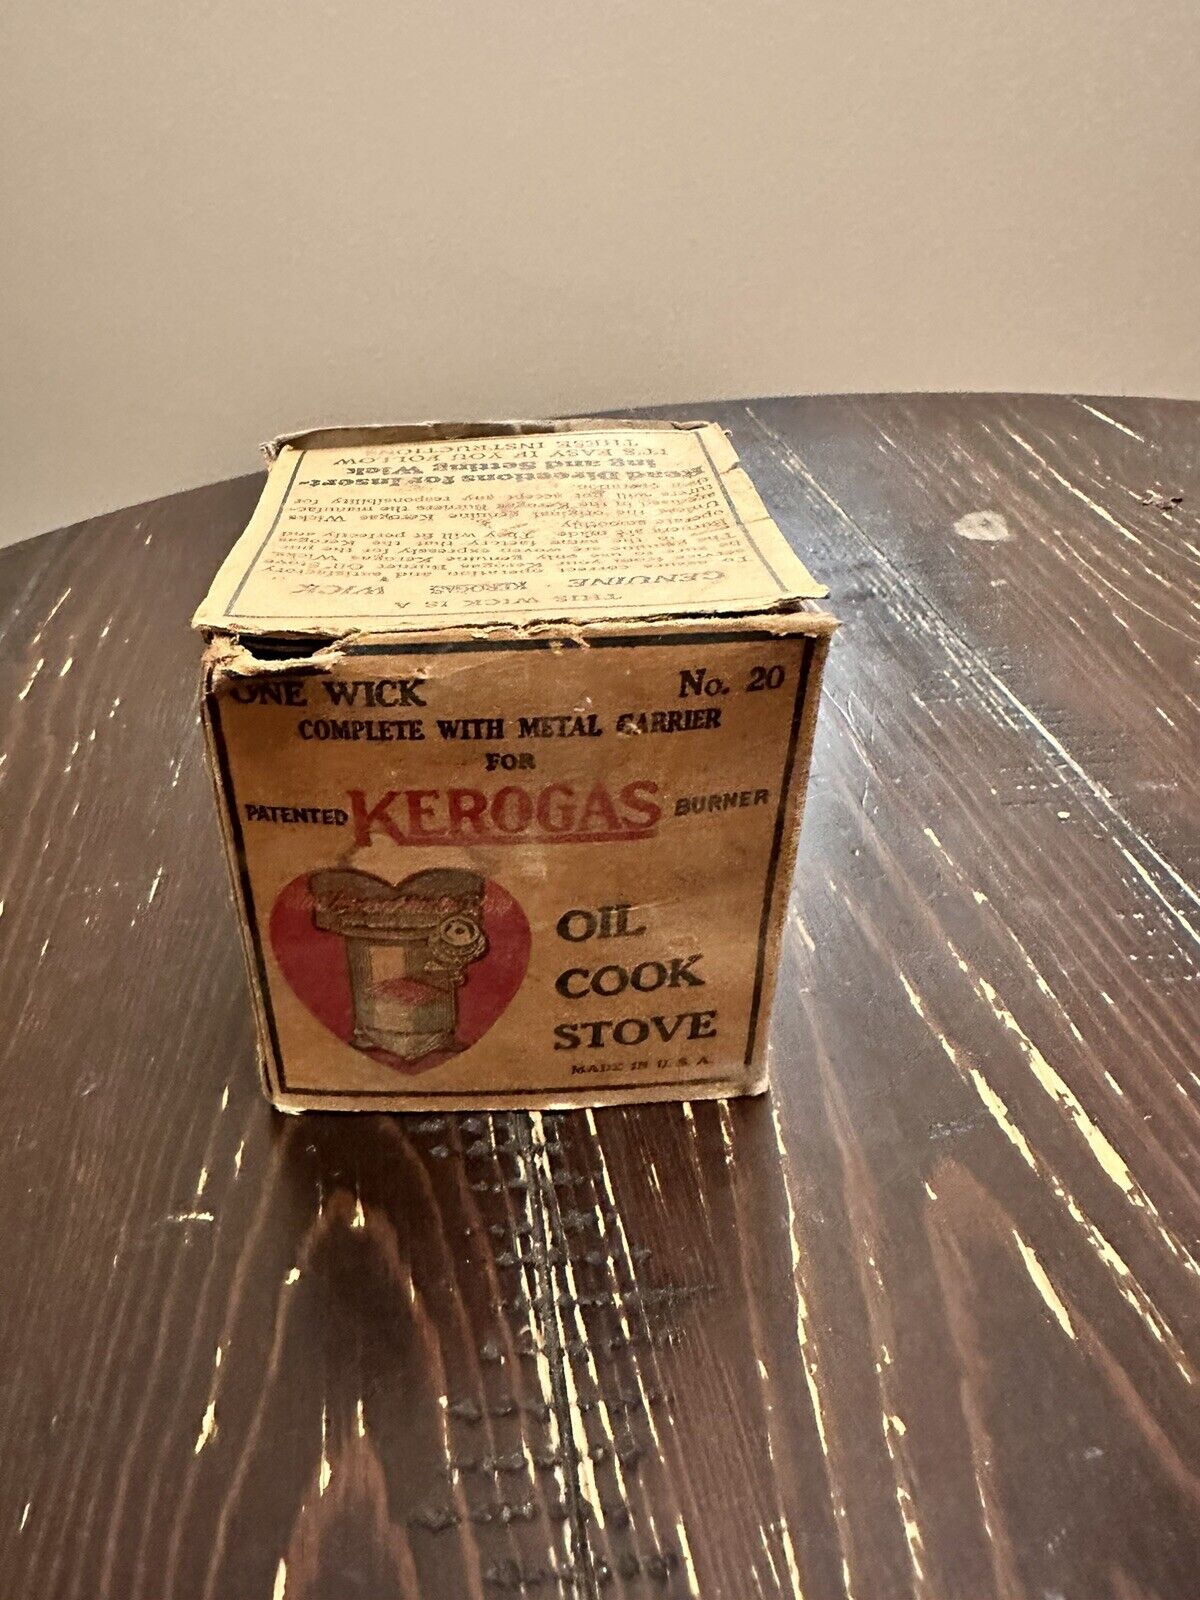 Kerogas No. 20 top Seal Oil Stove Wick w Metal Carrier New Old Stock NOS🚀🚀🍀🍀